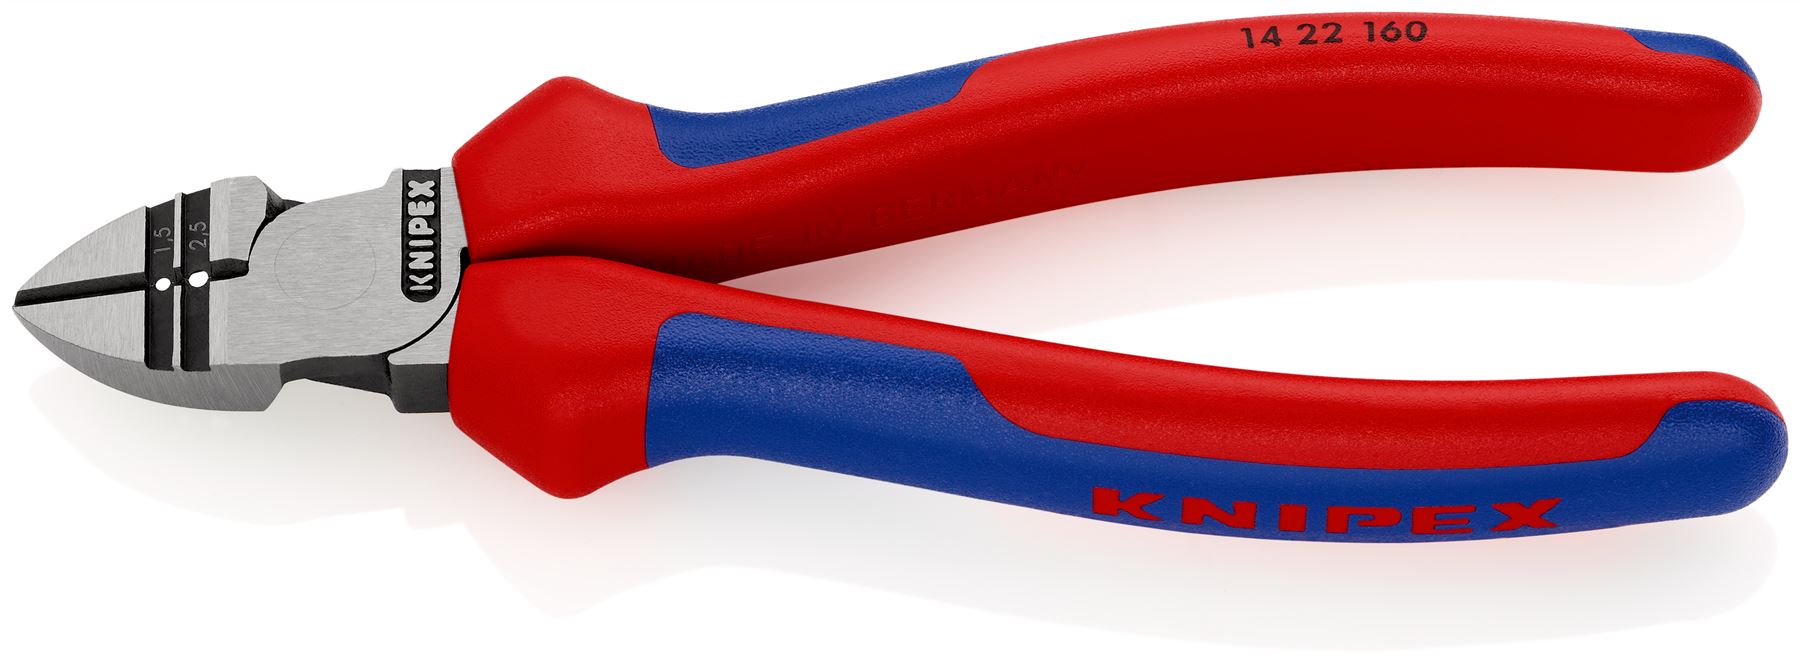 KNIPEX Diagonal Insulation Wire Stripper 160mm Multi Component Grips 14 22 160